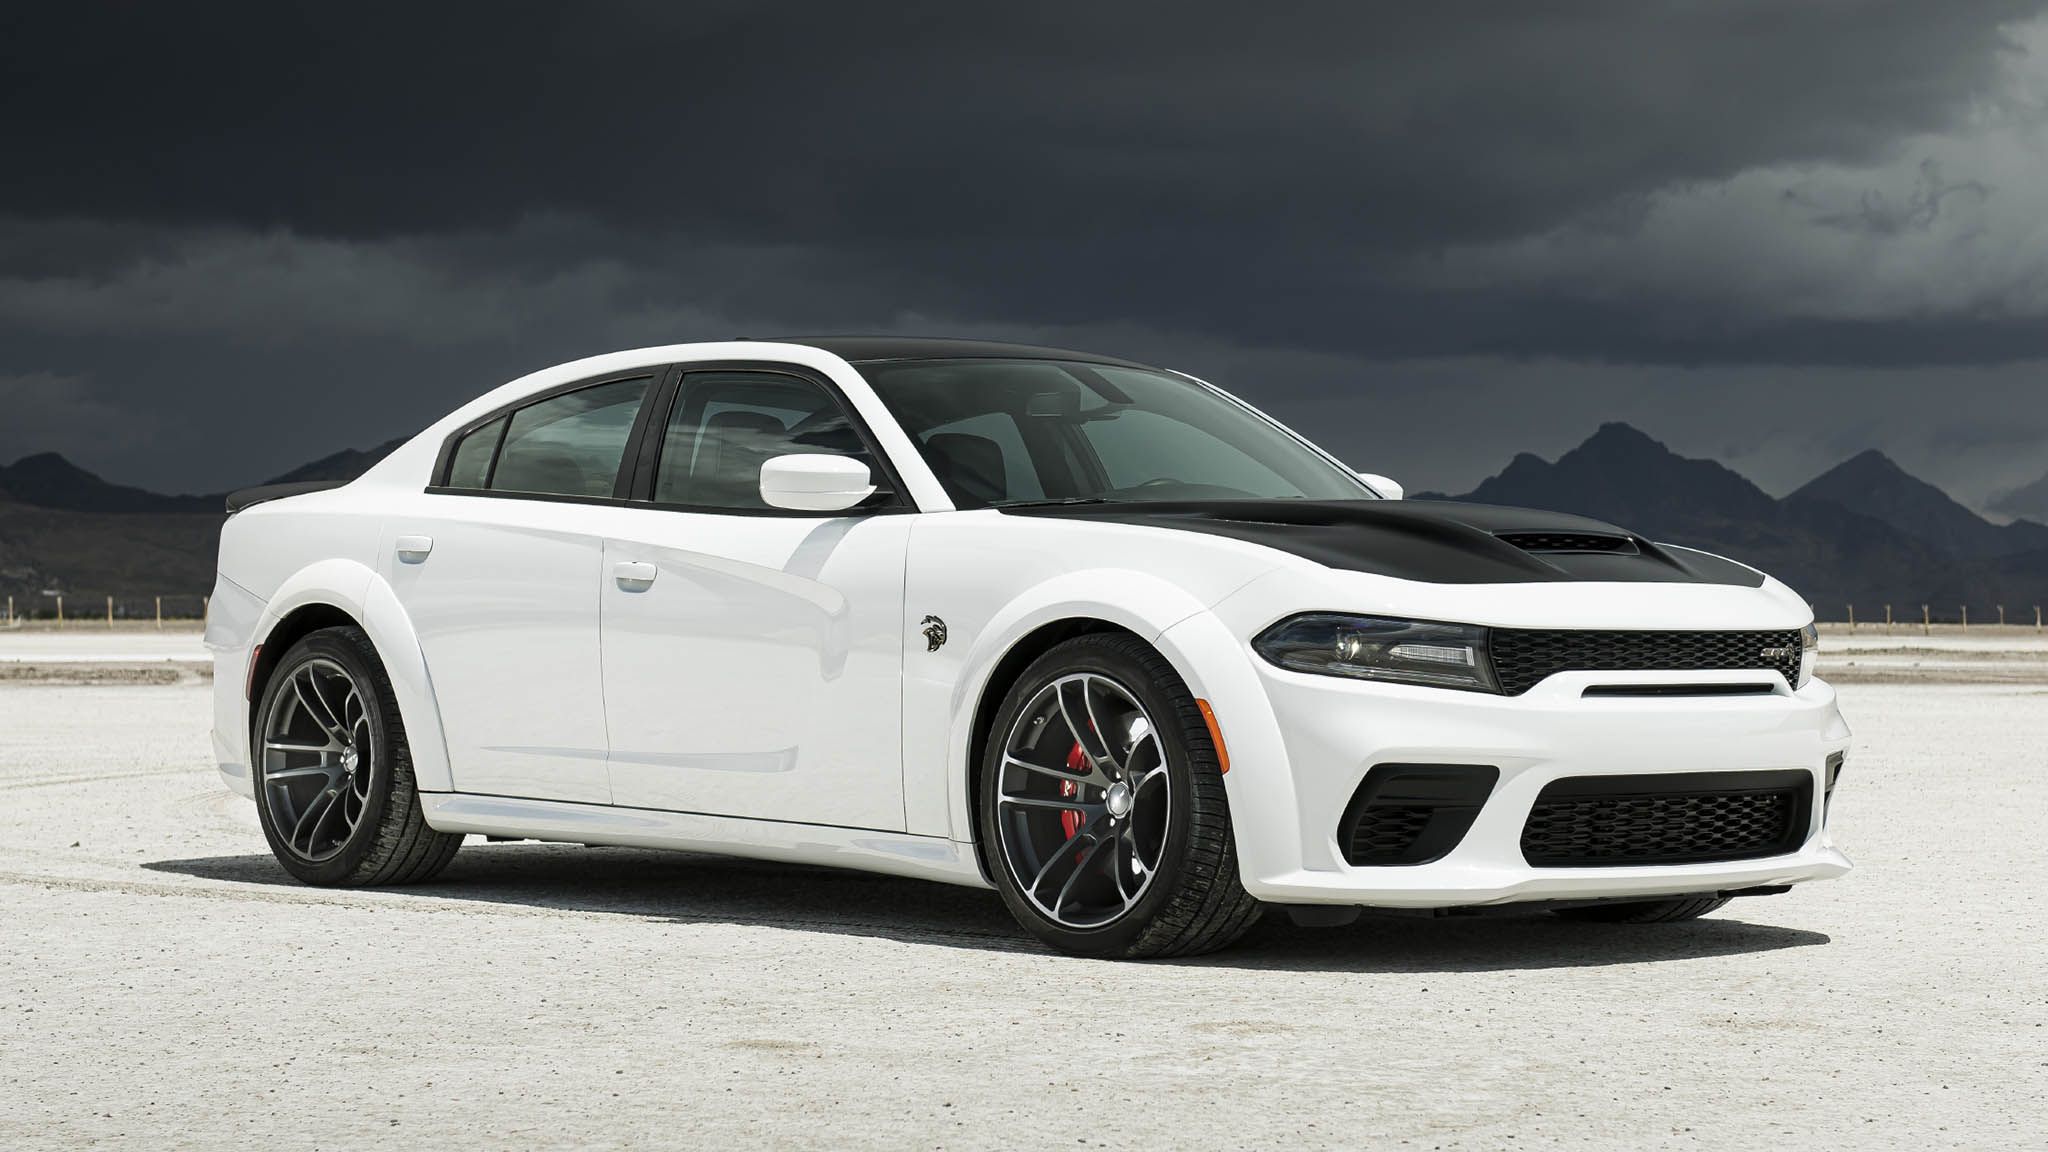 Dodge Charger Hellcat Redeye First Look: The Baddest Ass Sedan In The World—Period